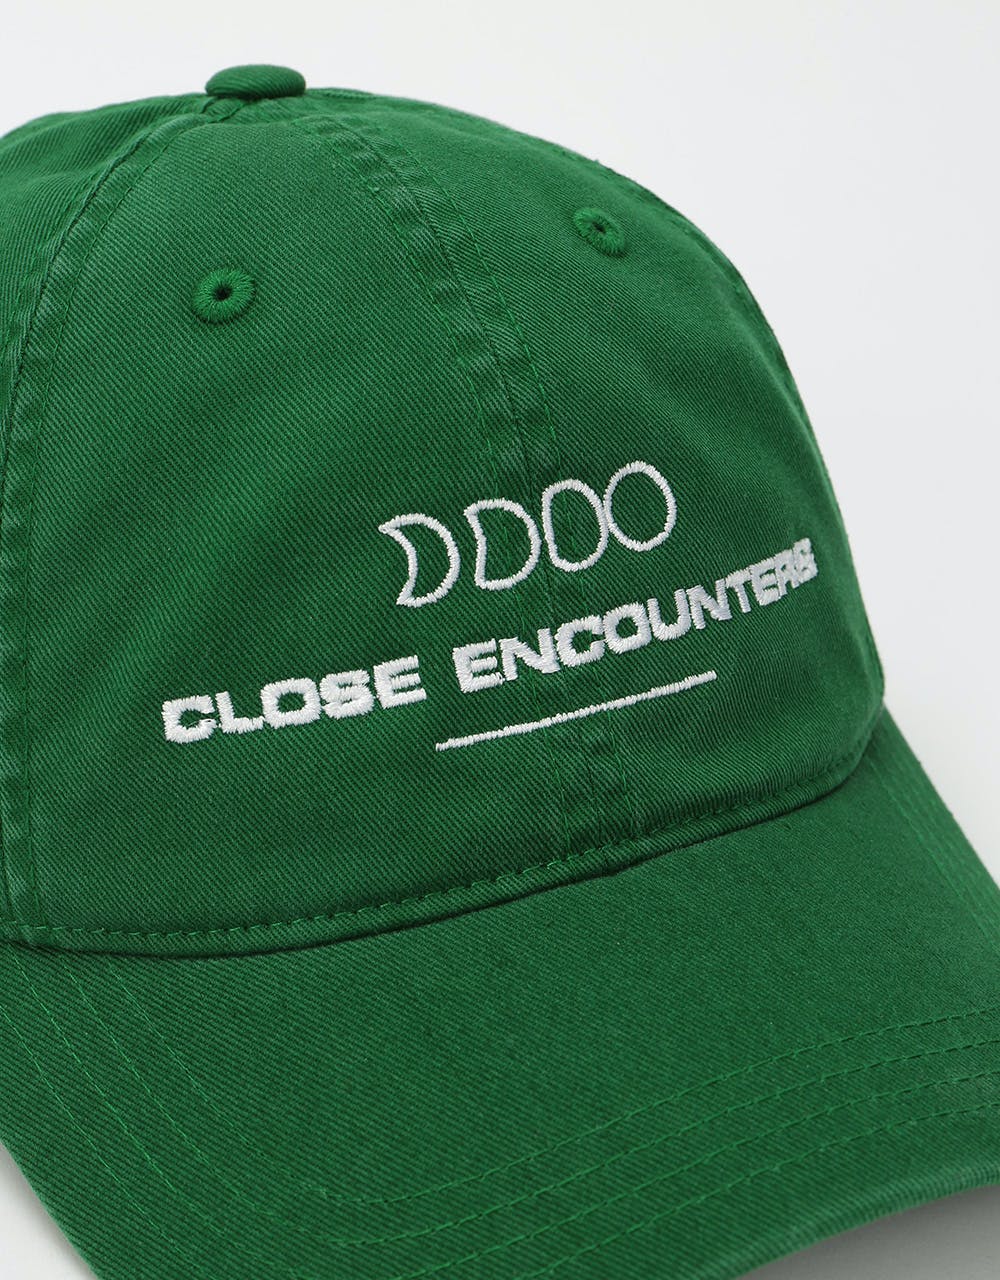 Route One Close Encounters Cap - Forest Green